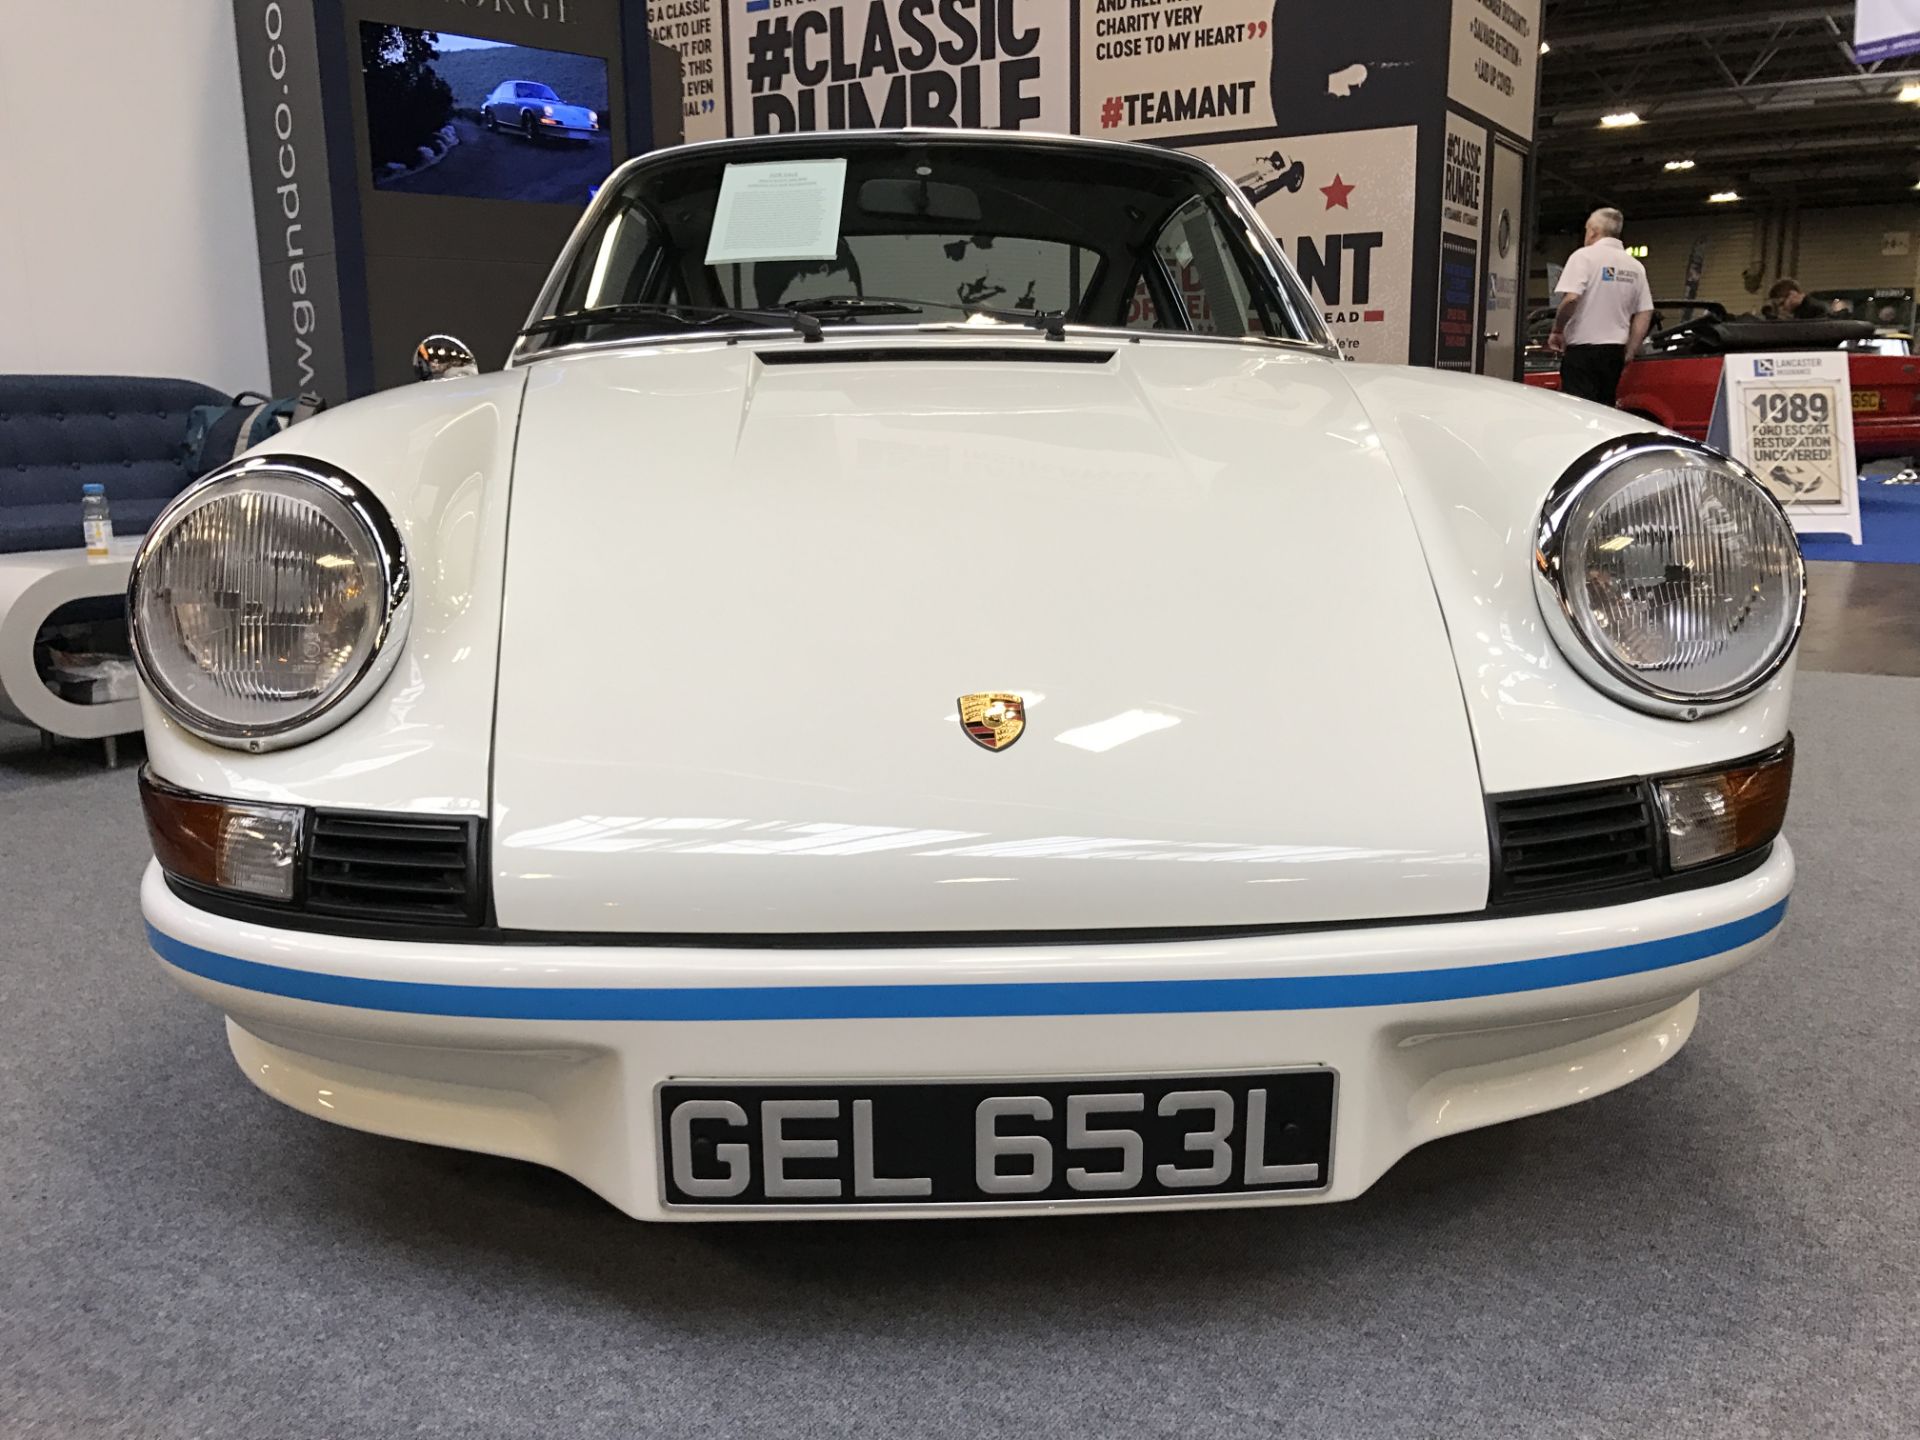 Porsche 911 Carrera 2.7 Rs Recreation - Pro 9 Build Based On A 1986 Porsche 911 **Reserve reduced** - Image 5 of 21